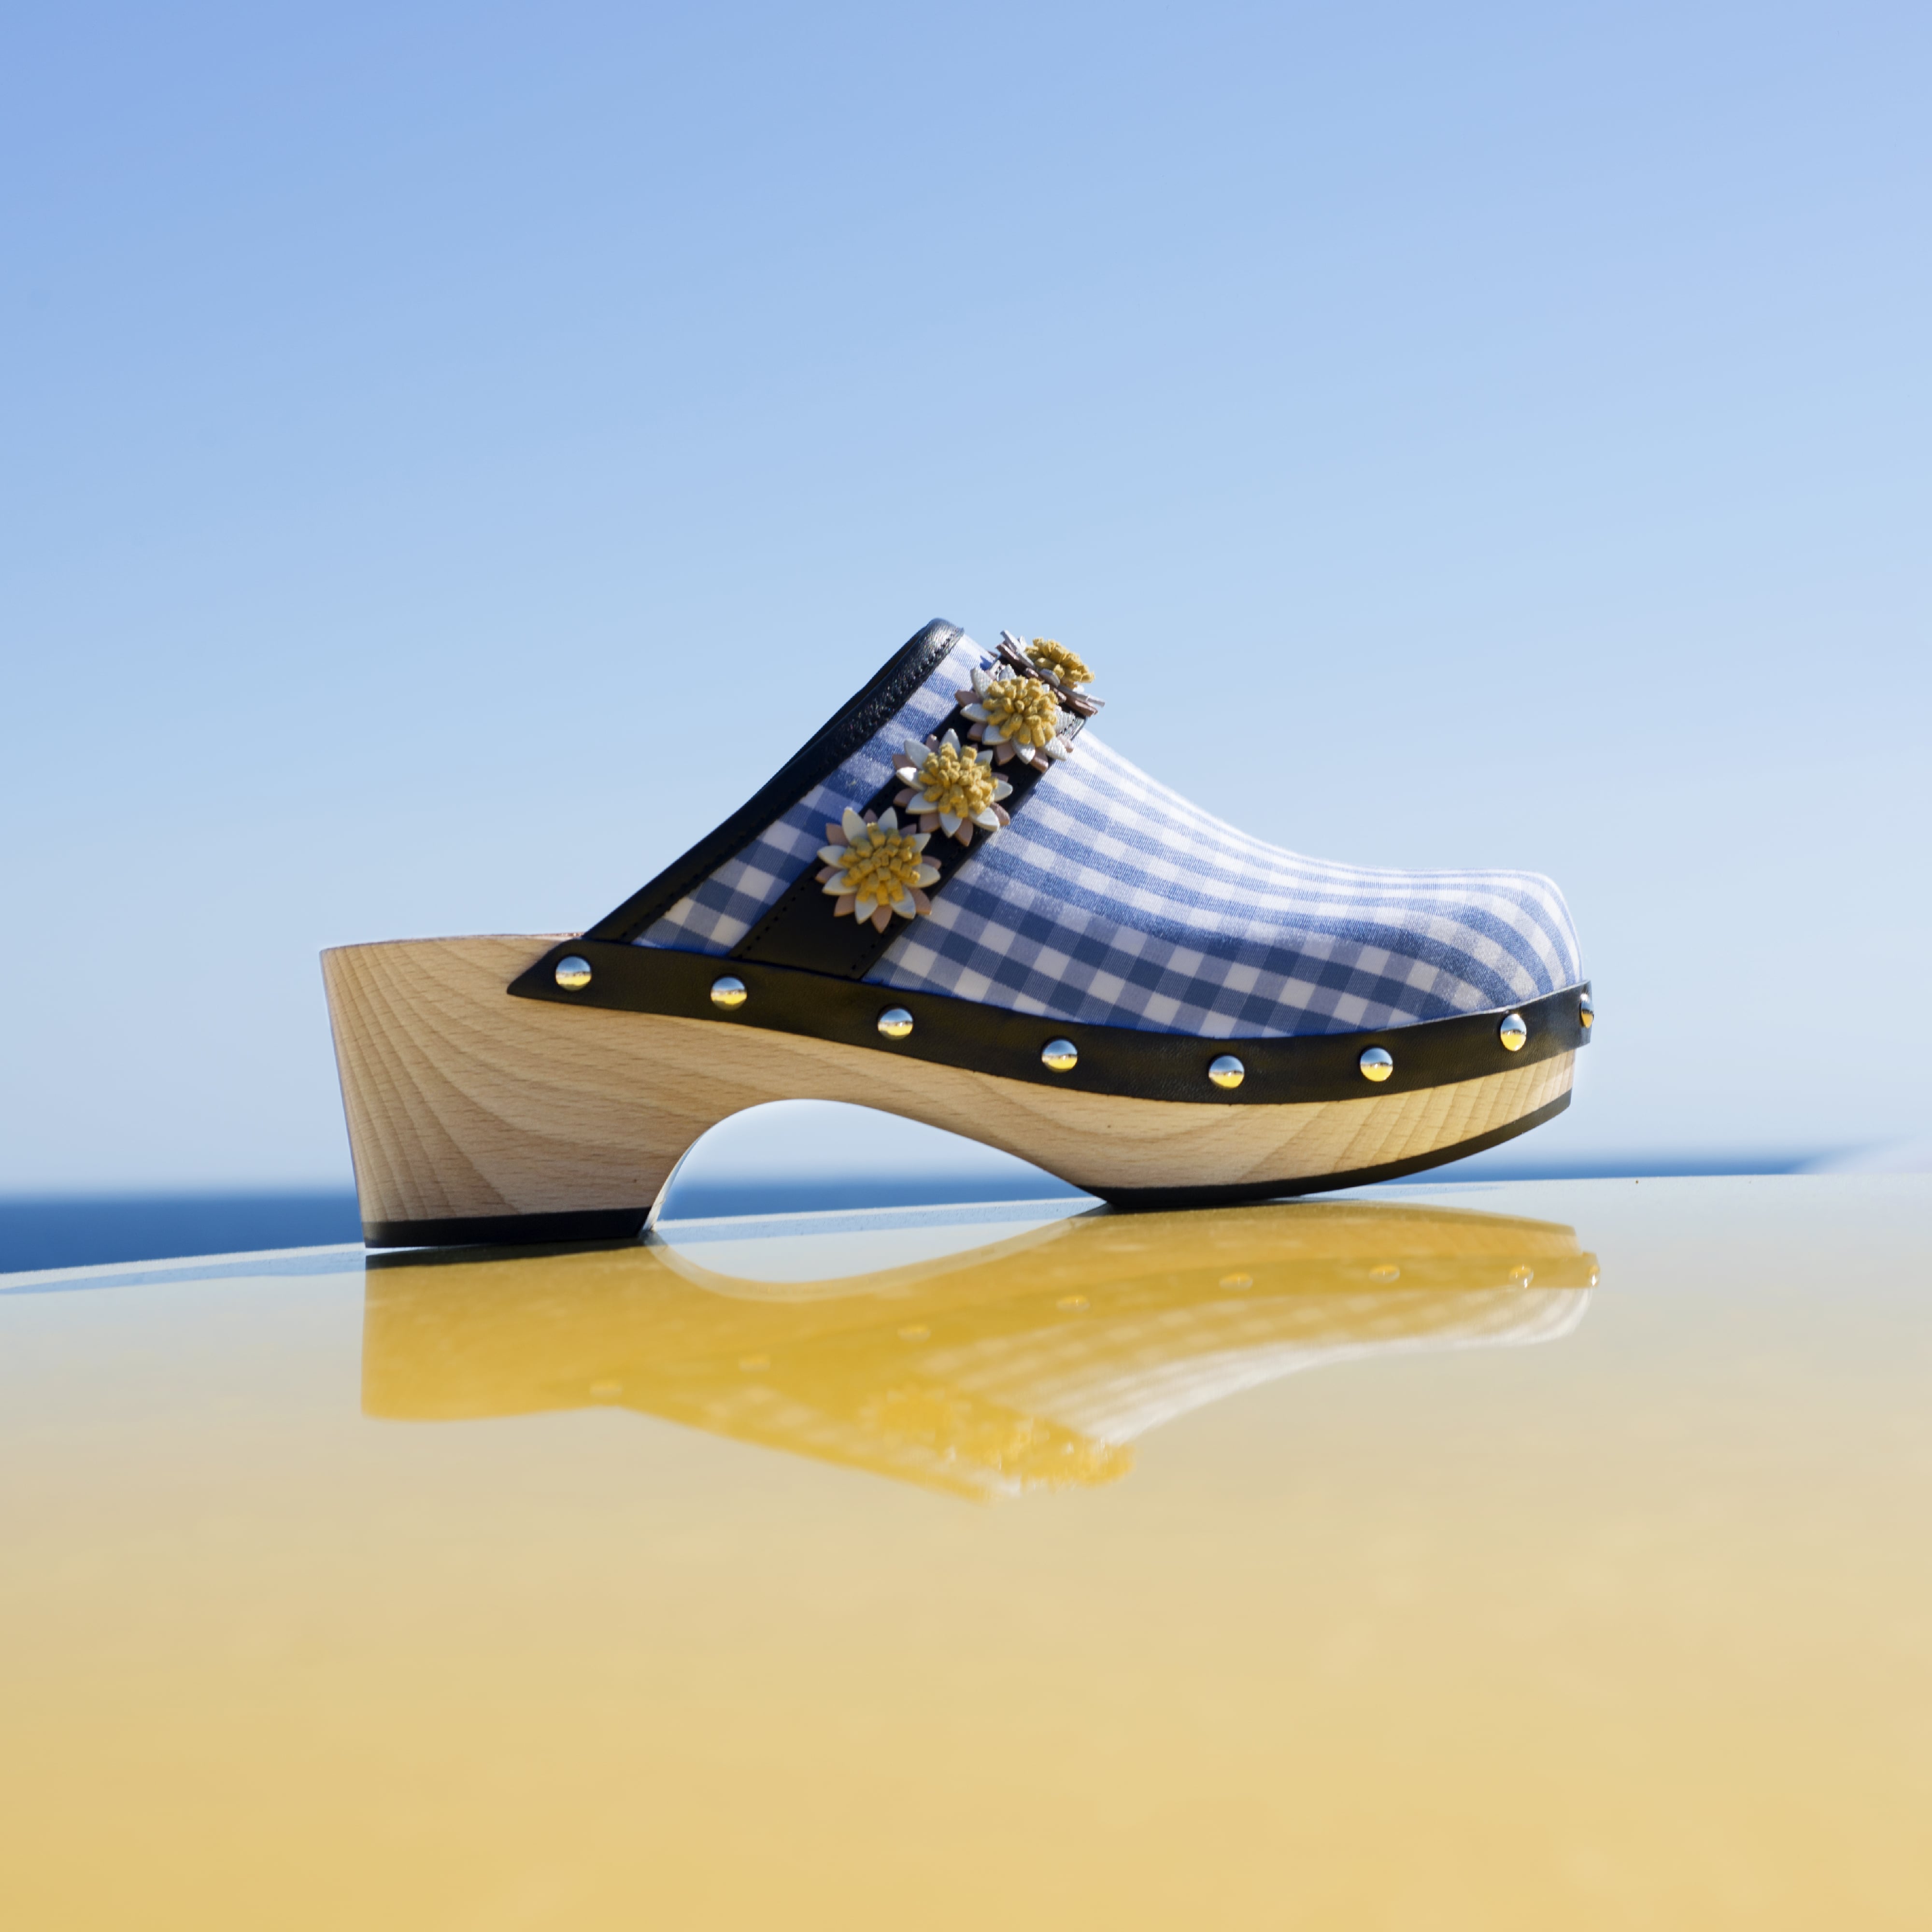 Are Louis Vuitton's high fashion clogs the shoe of the season